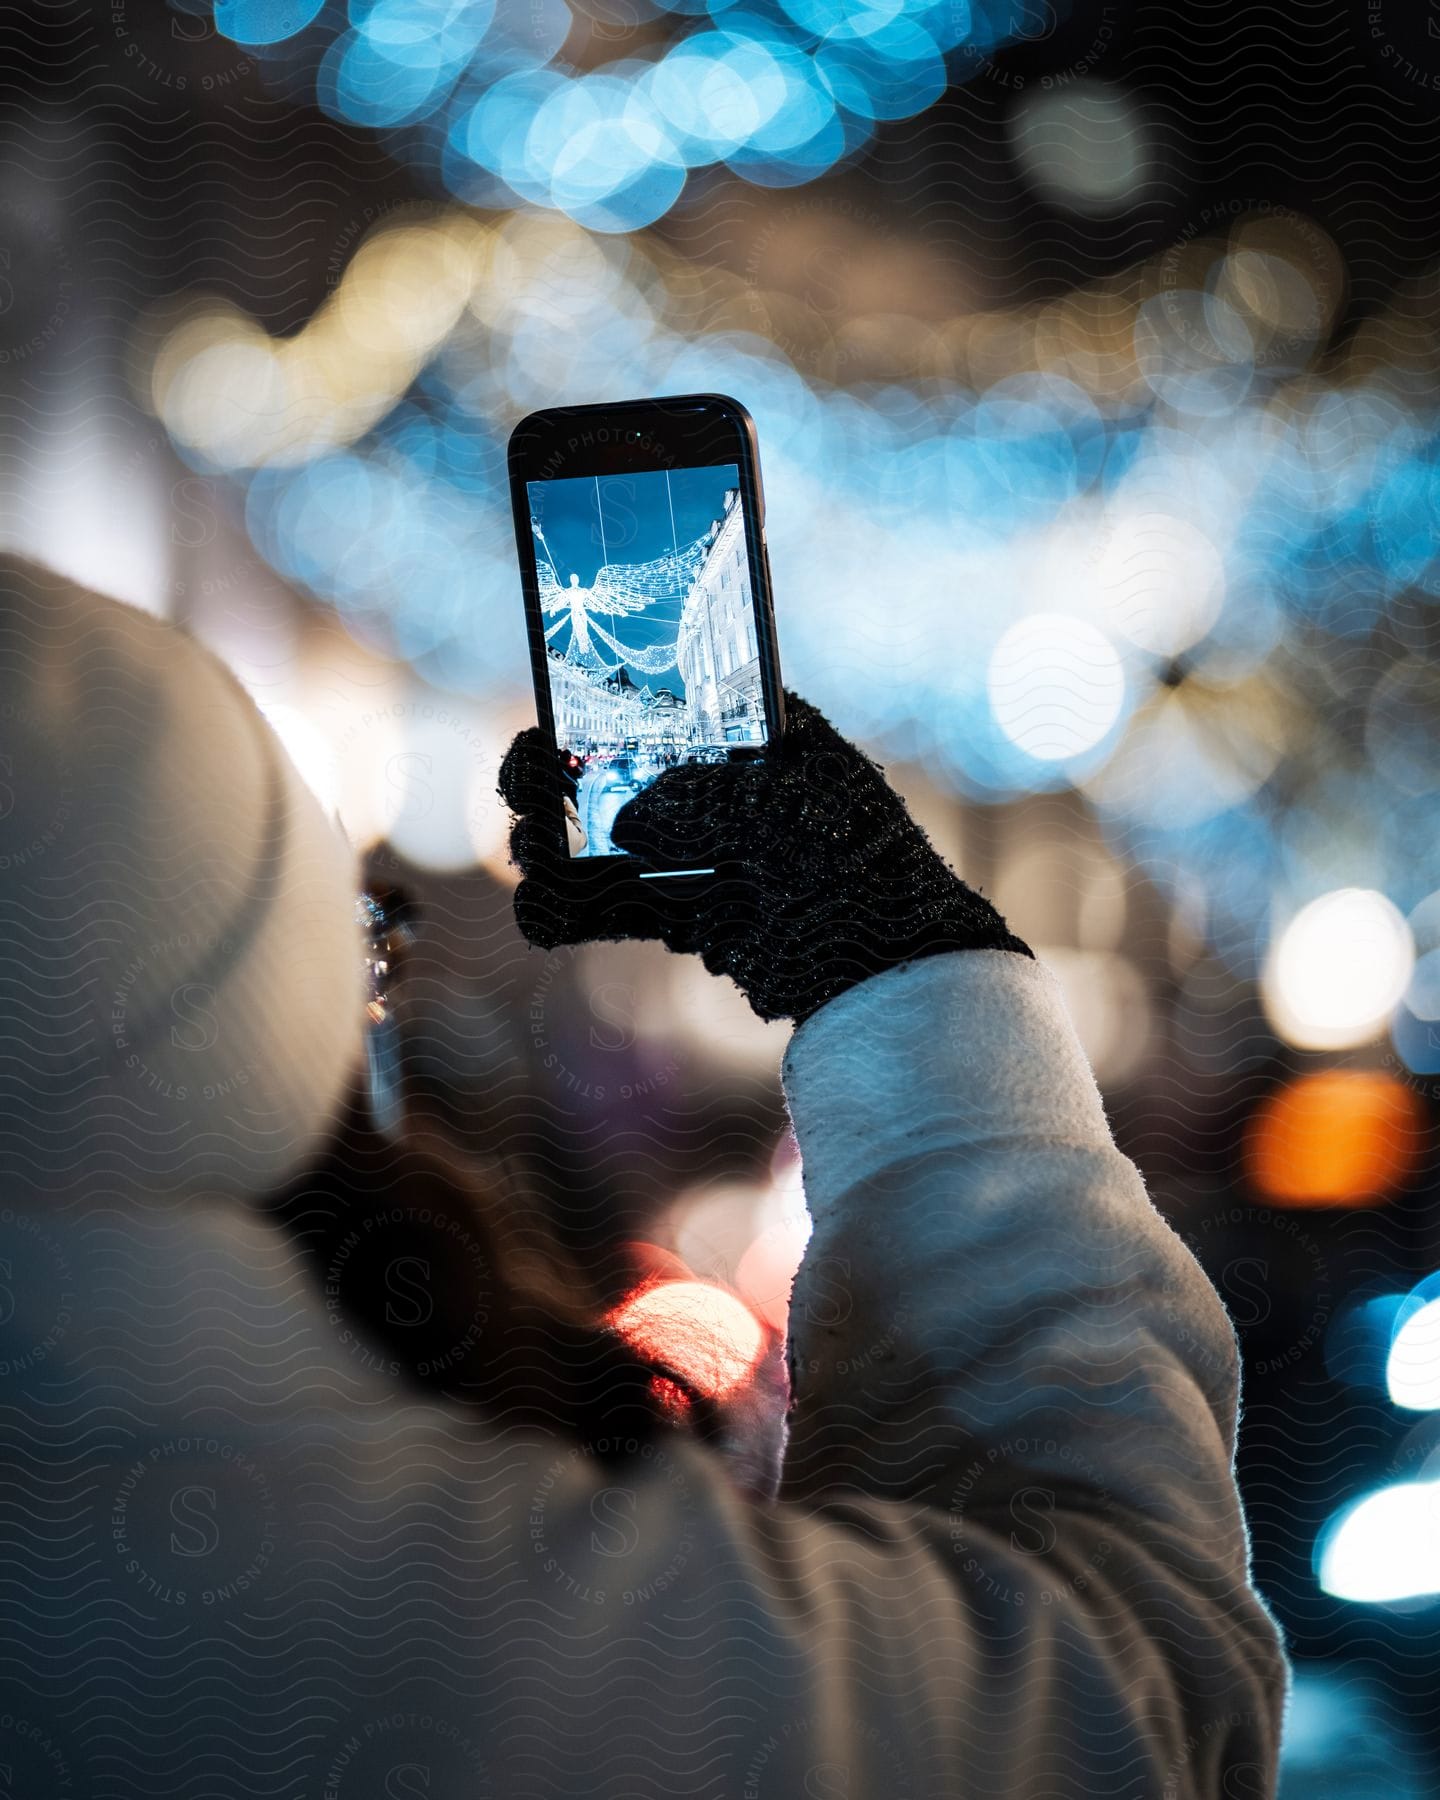 A woman wearing winter clothes holds up her cellphone to take a picture of holiday lights in the city